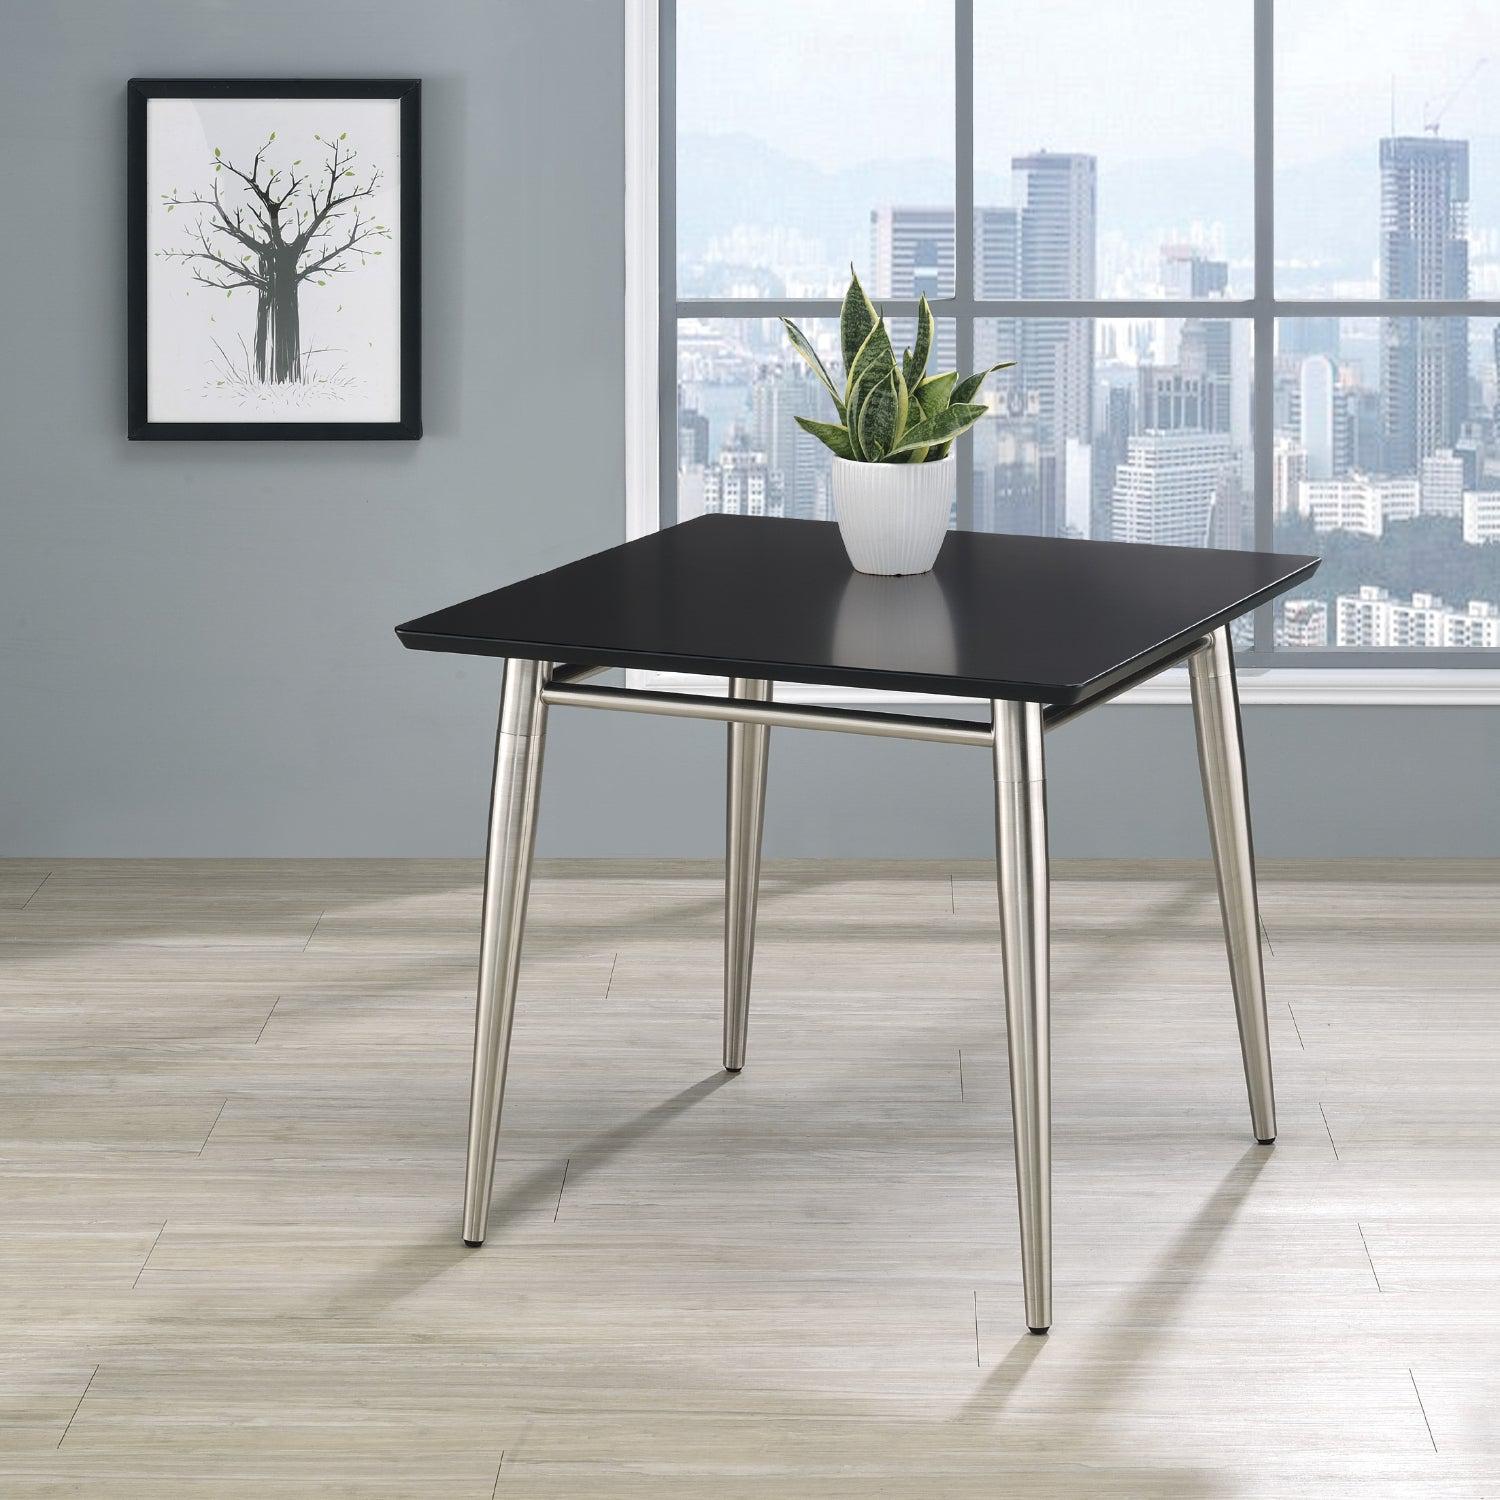 Brooklyn Square End Table with Black Top